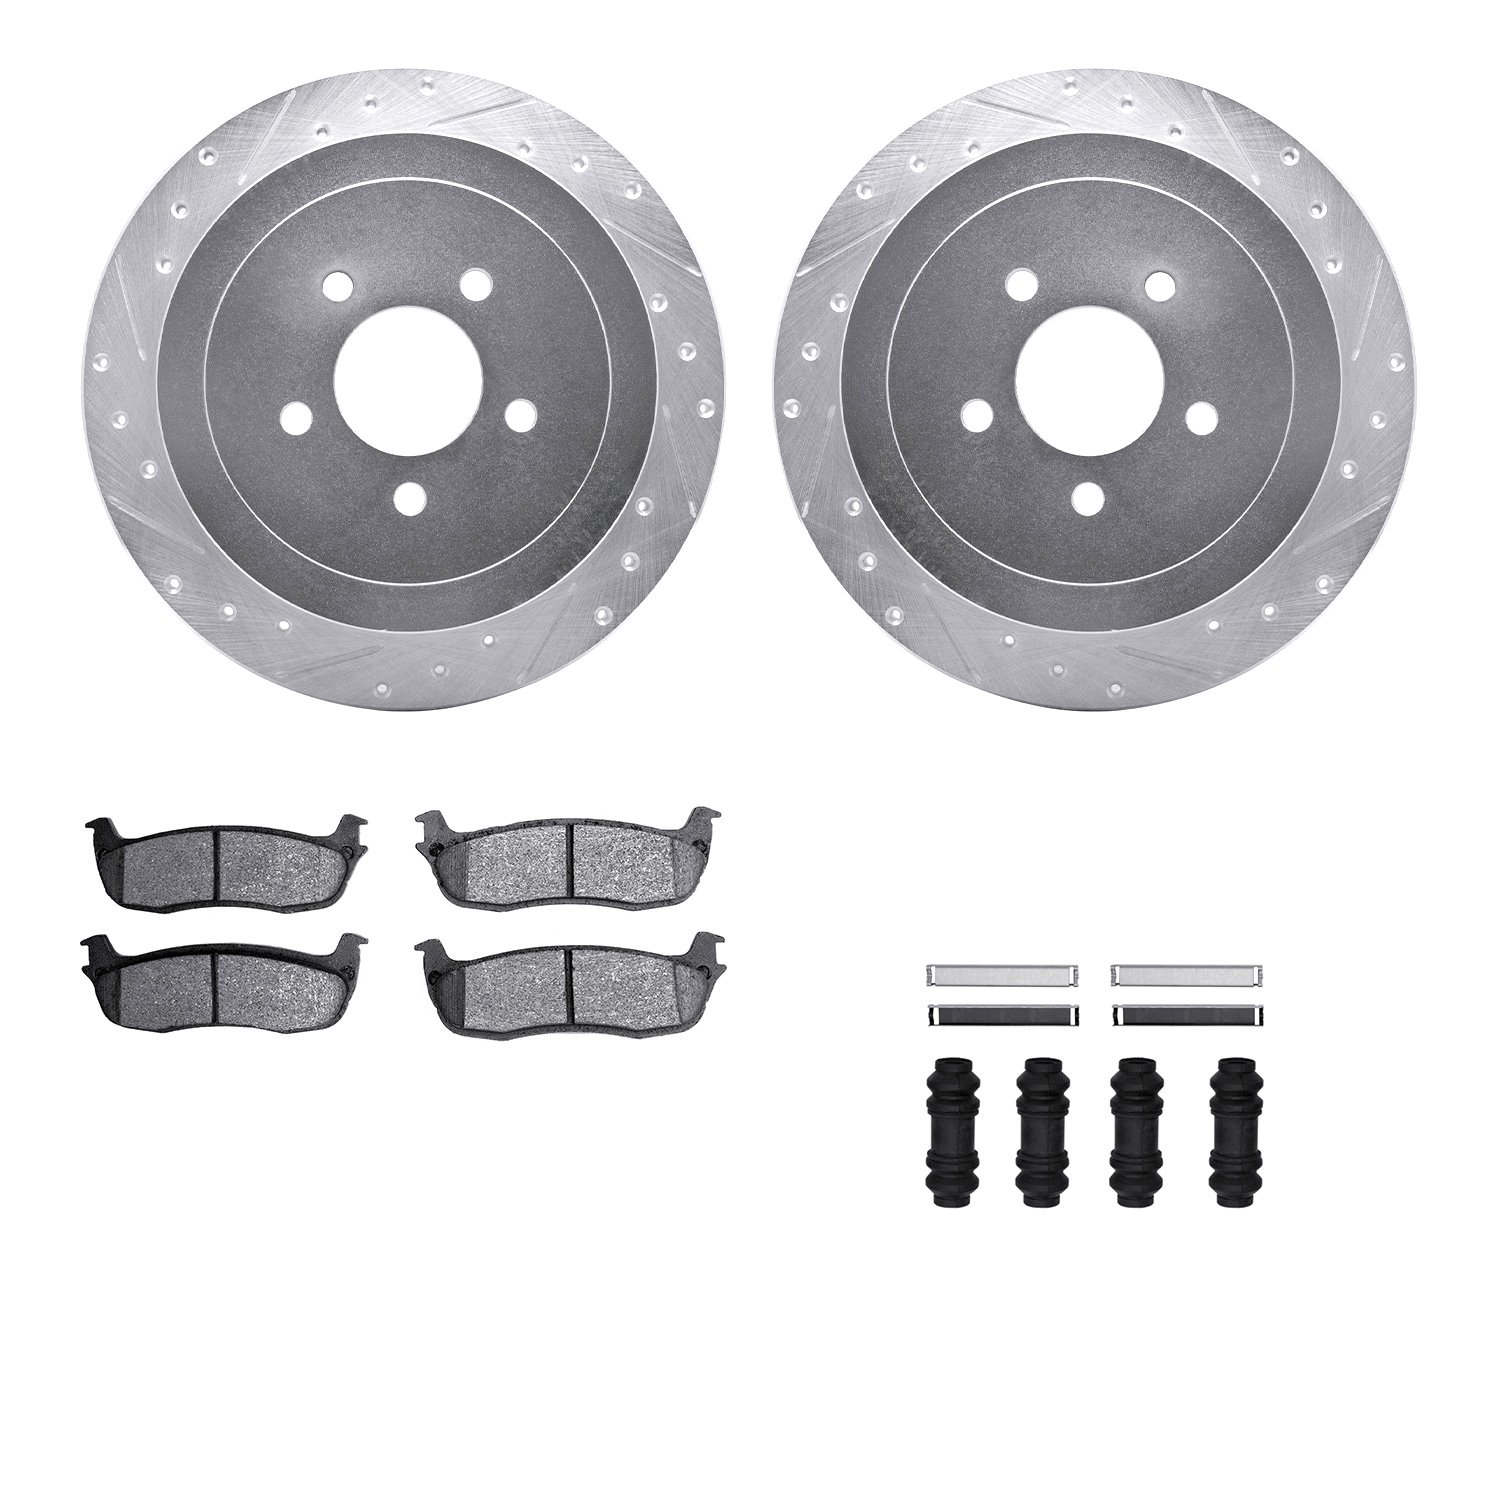 7212-55004 Drilled/Slotted Rotors w/Heavy-Duty Brake Pads Kit & Hardware [Silver], 2003-2011 Ford/Lincoln/Mercury/Mazda, Positio